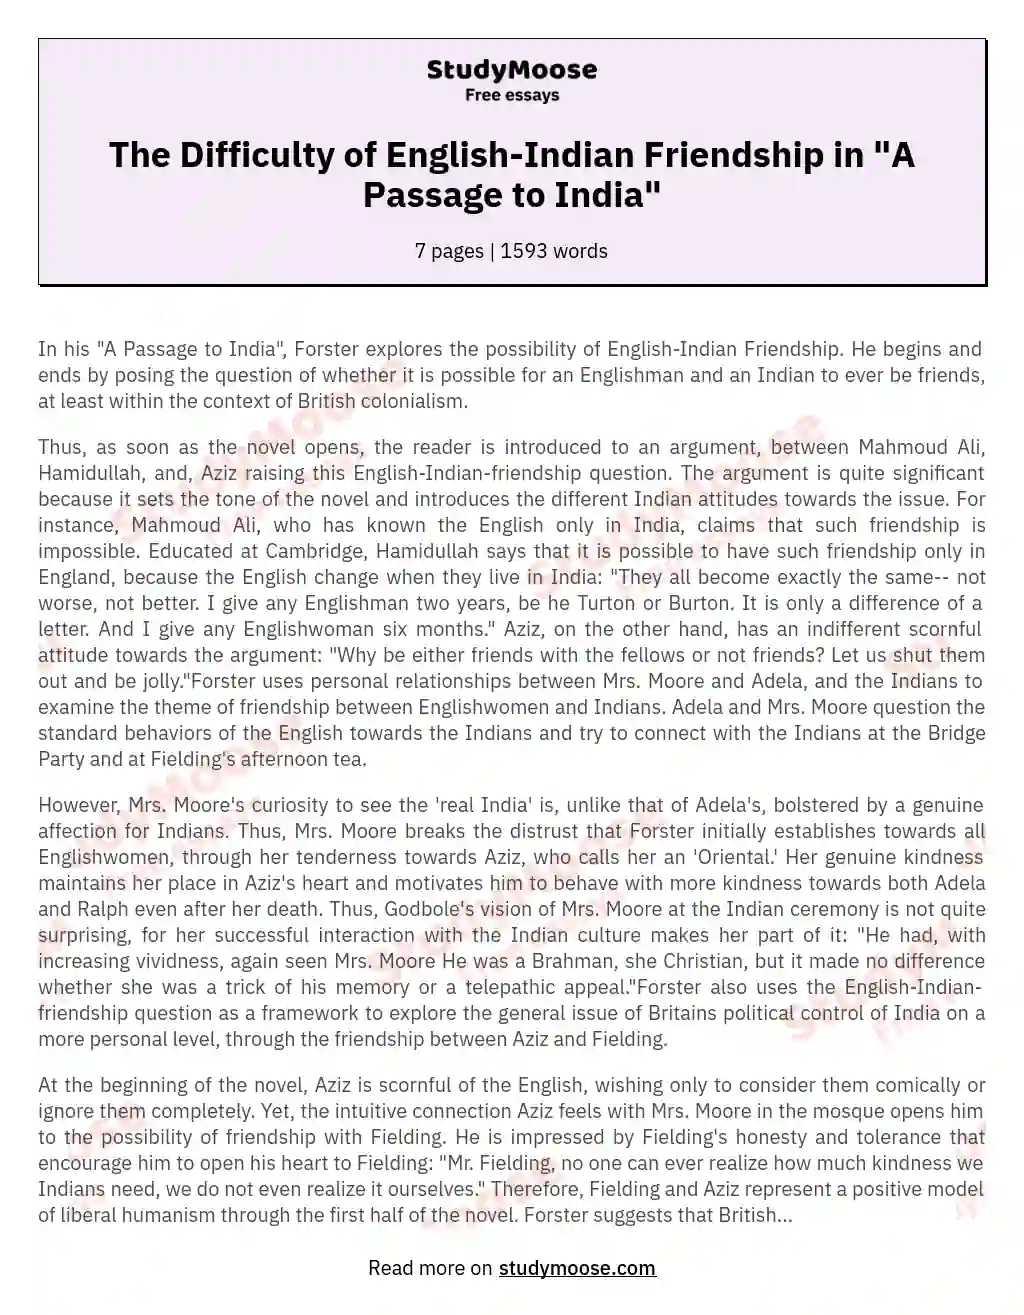 The Difficulty of English-Indian Friendship in "A Passage to India" essay